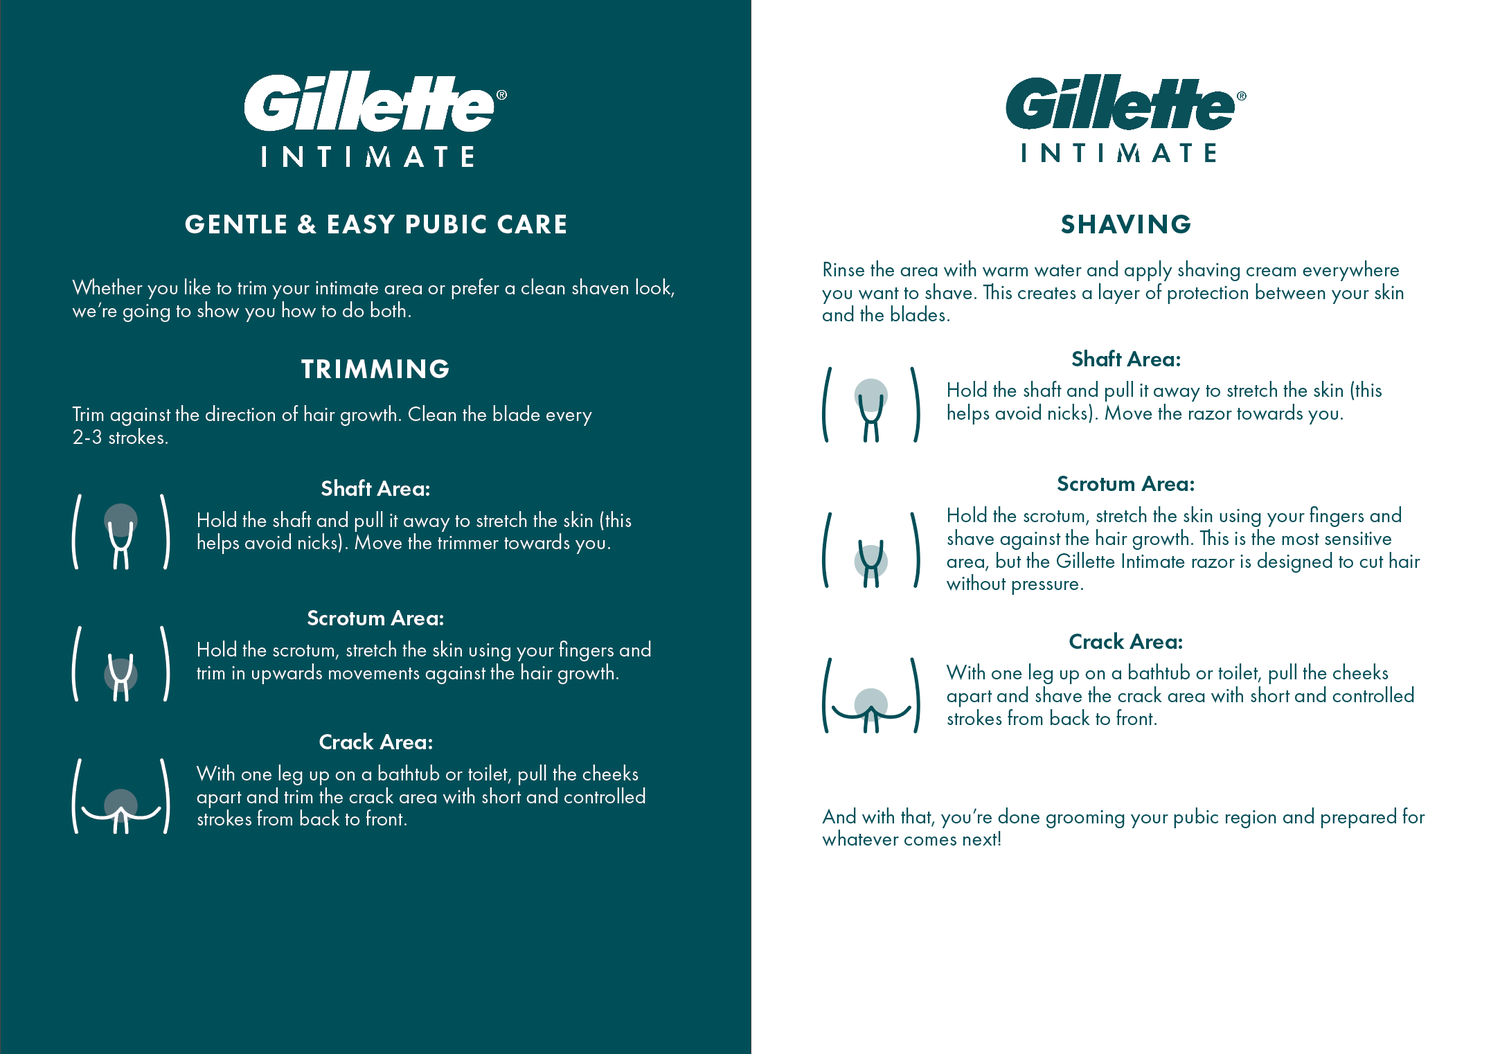 How to use Gillette INTIMATE for wet and dry pubic care